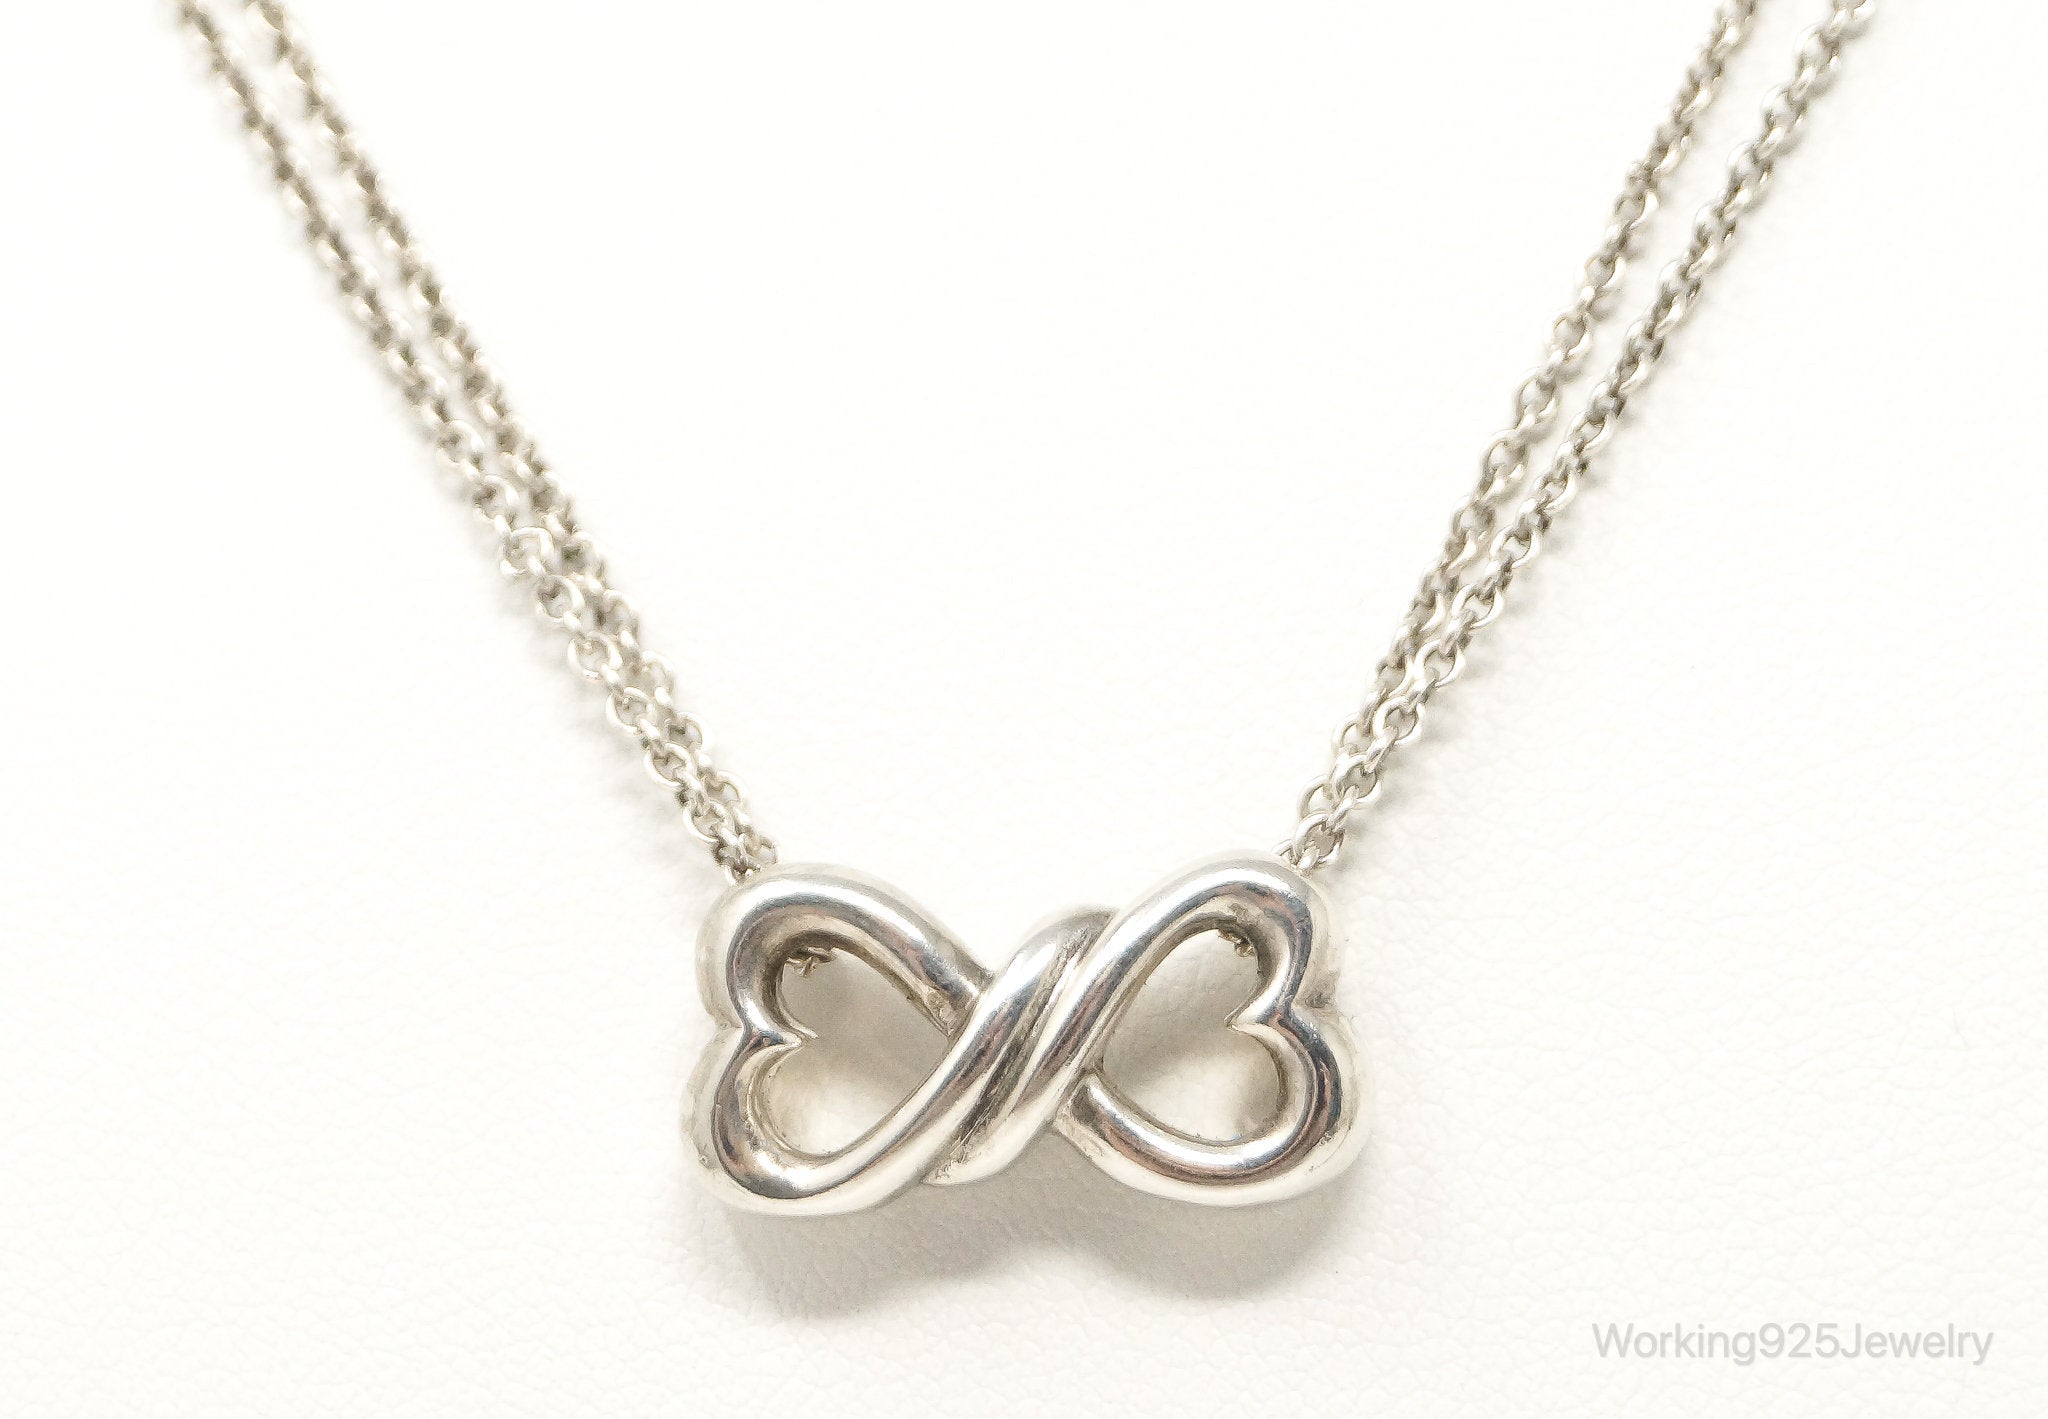 Vintage Open Linked Hearts Lovers Infinity Sterling Silver Necklace